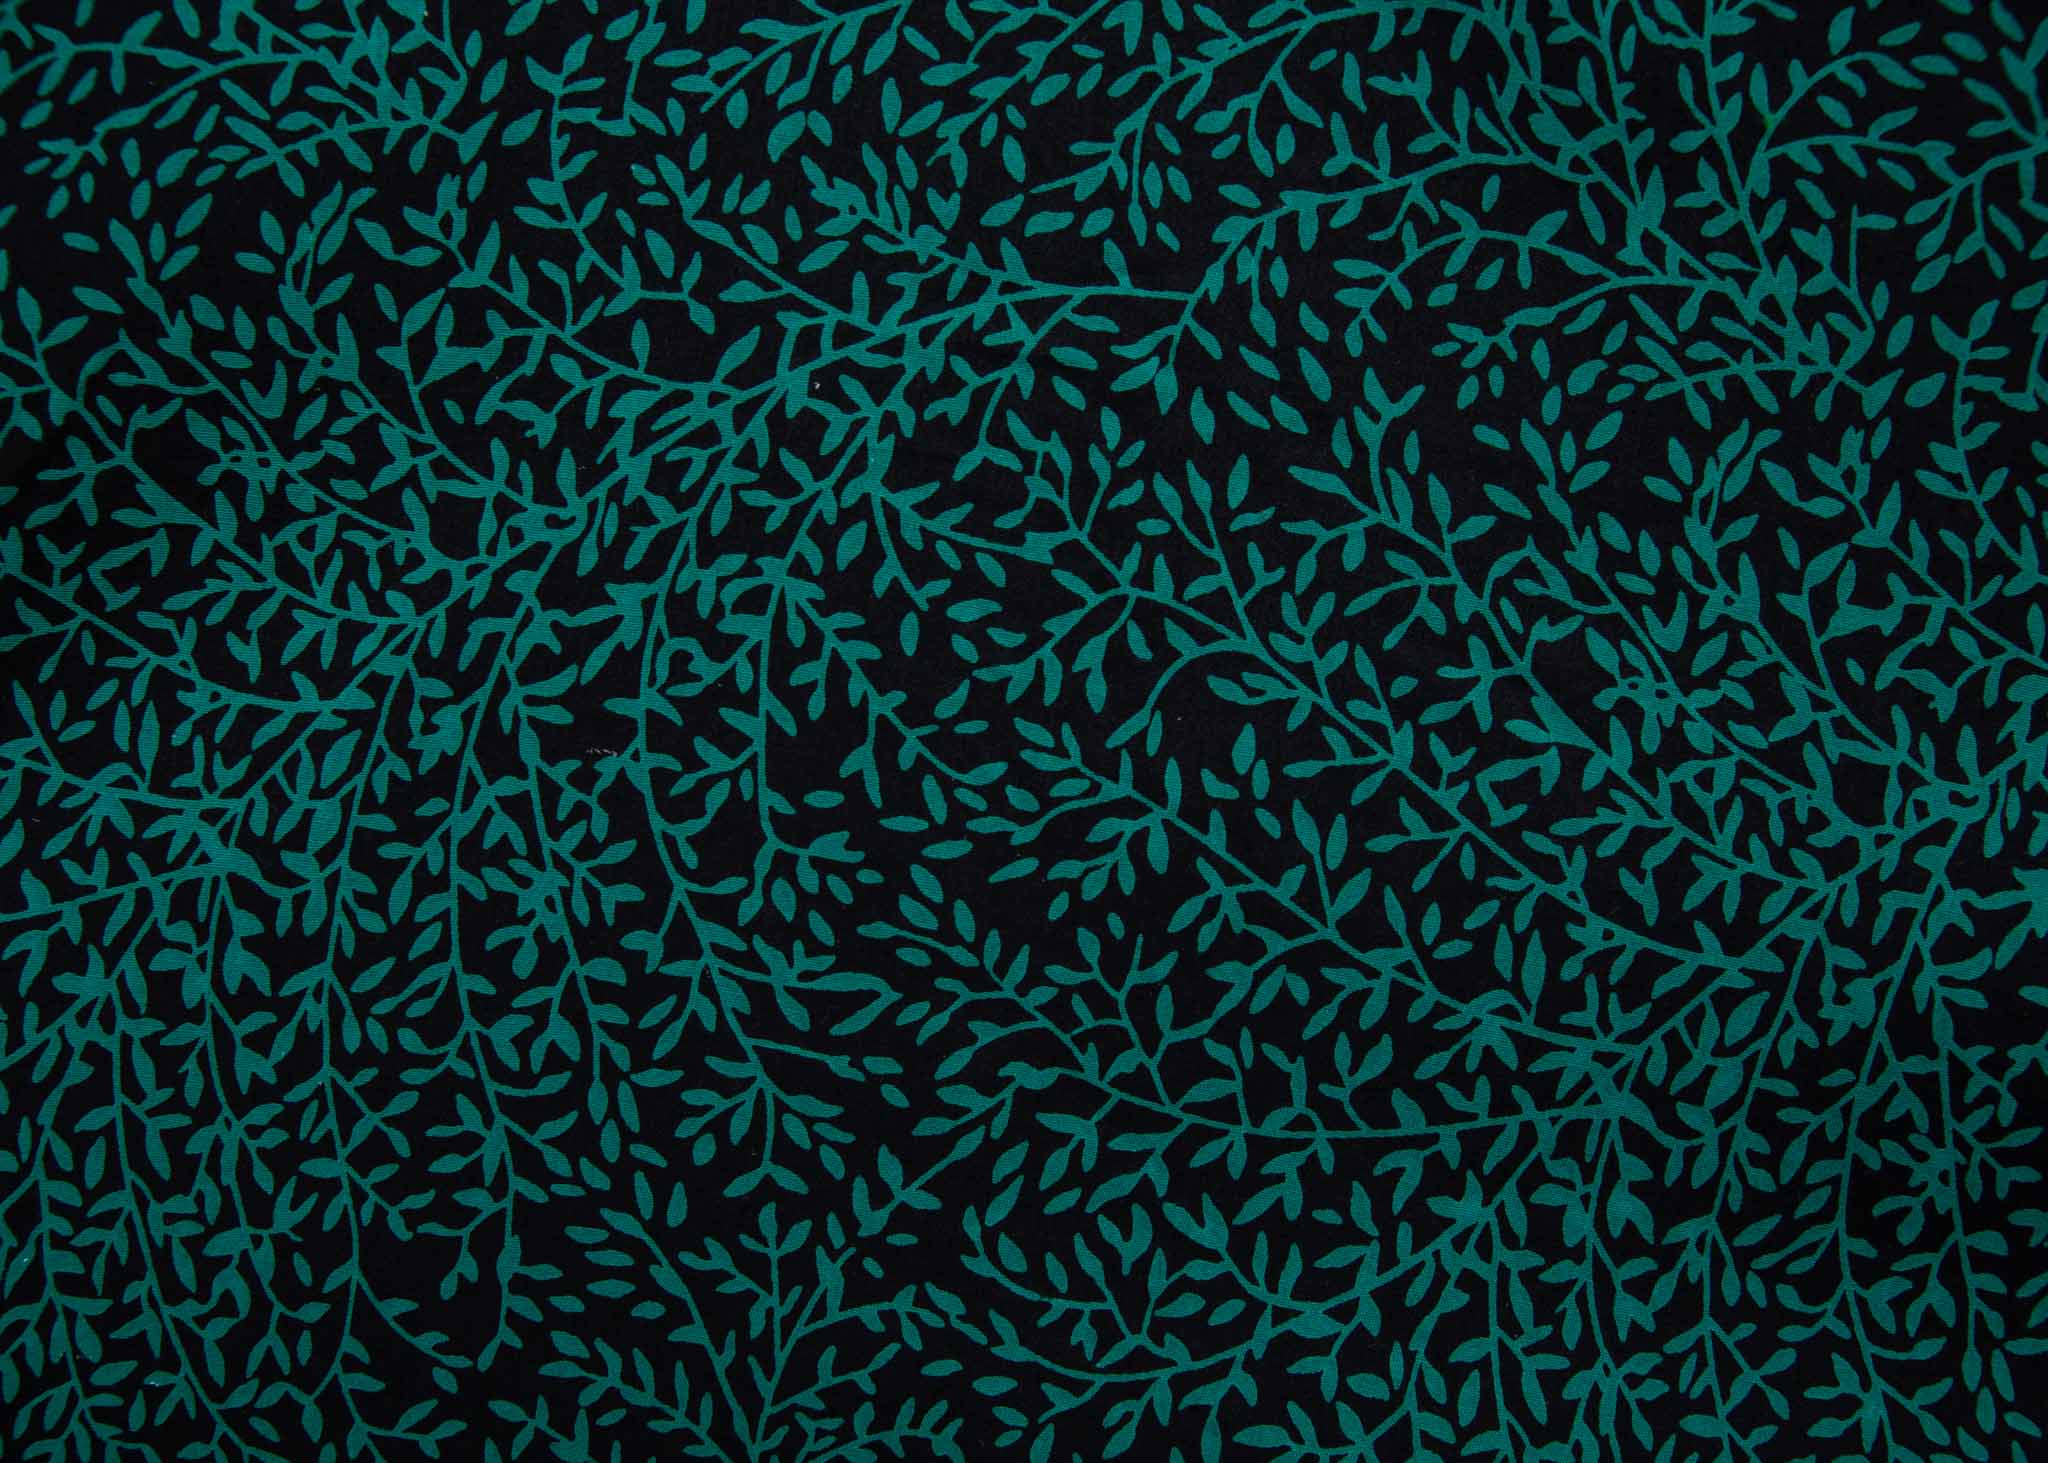 Close up display of black and green dress with small vine print, fabric.